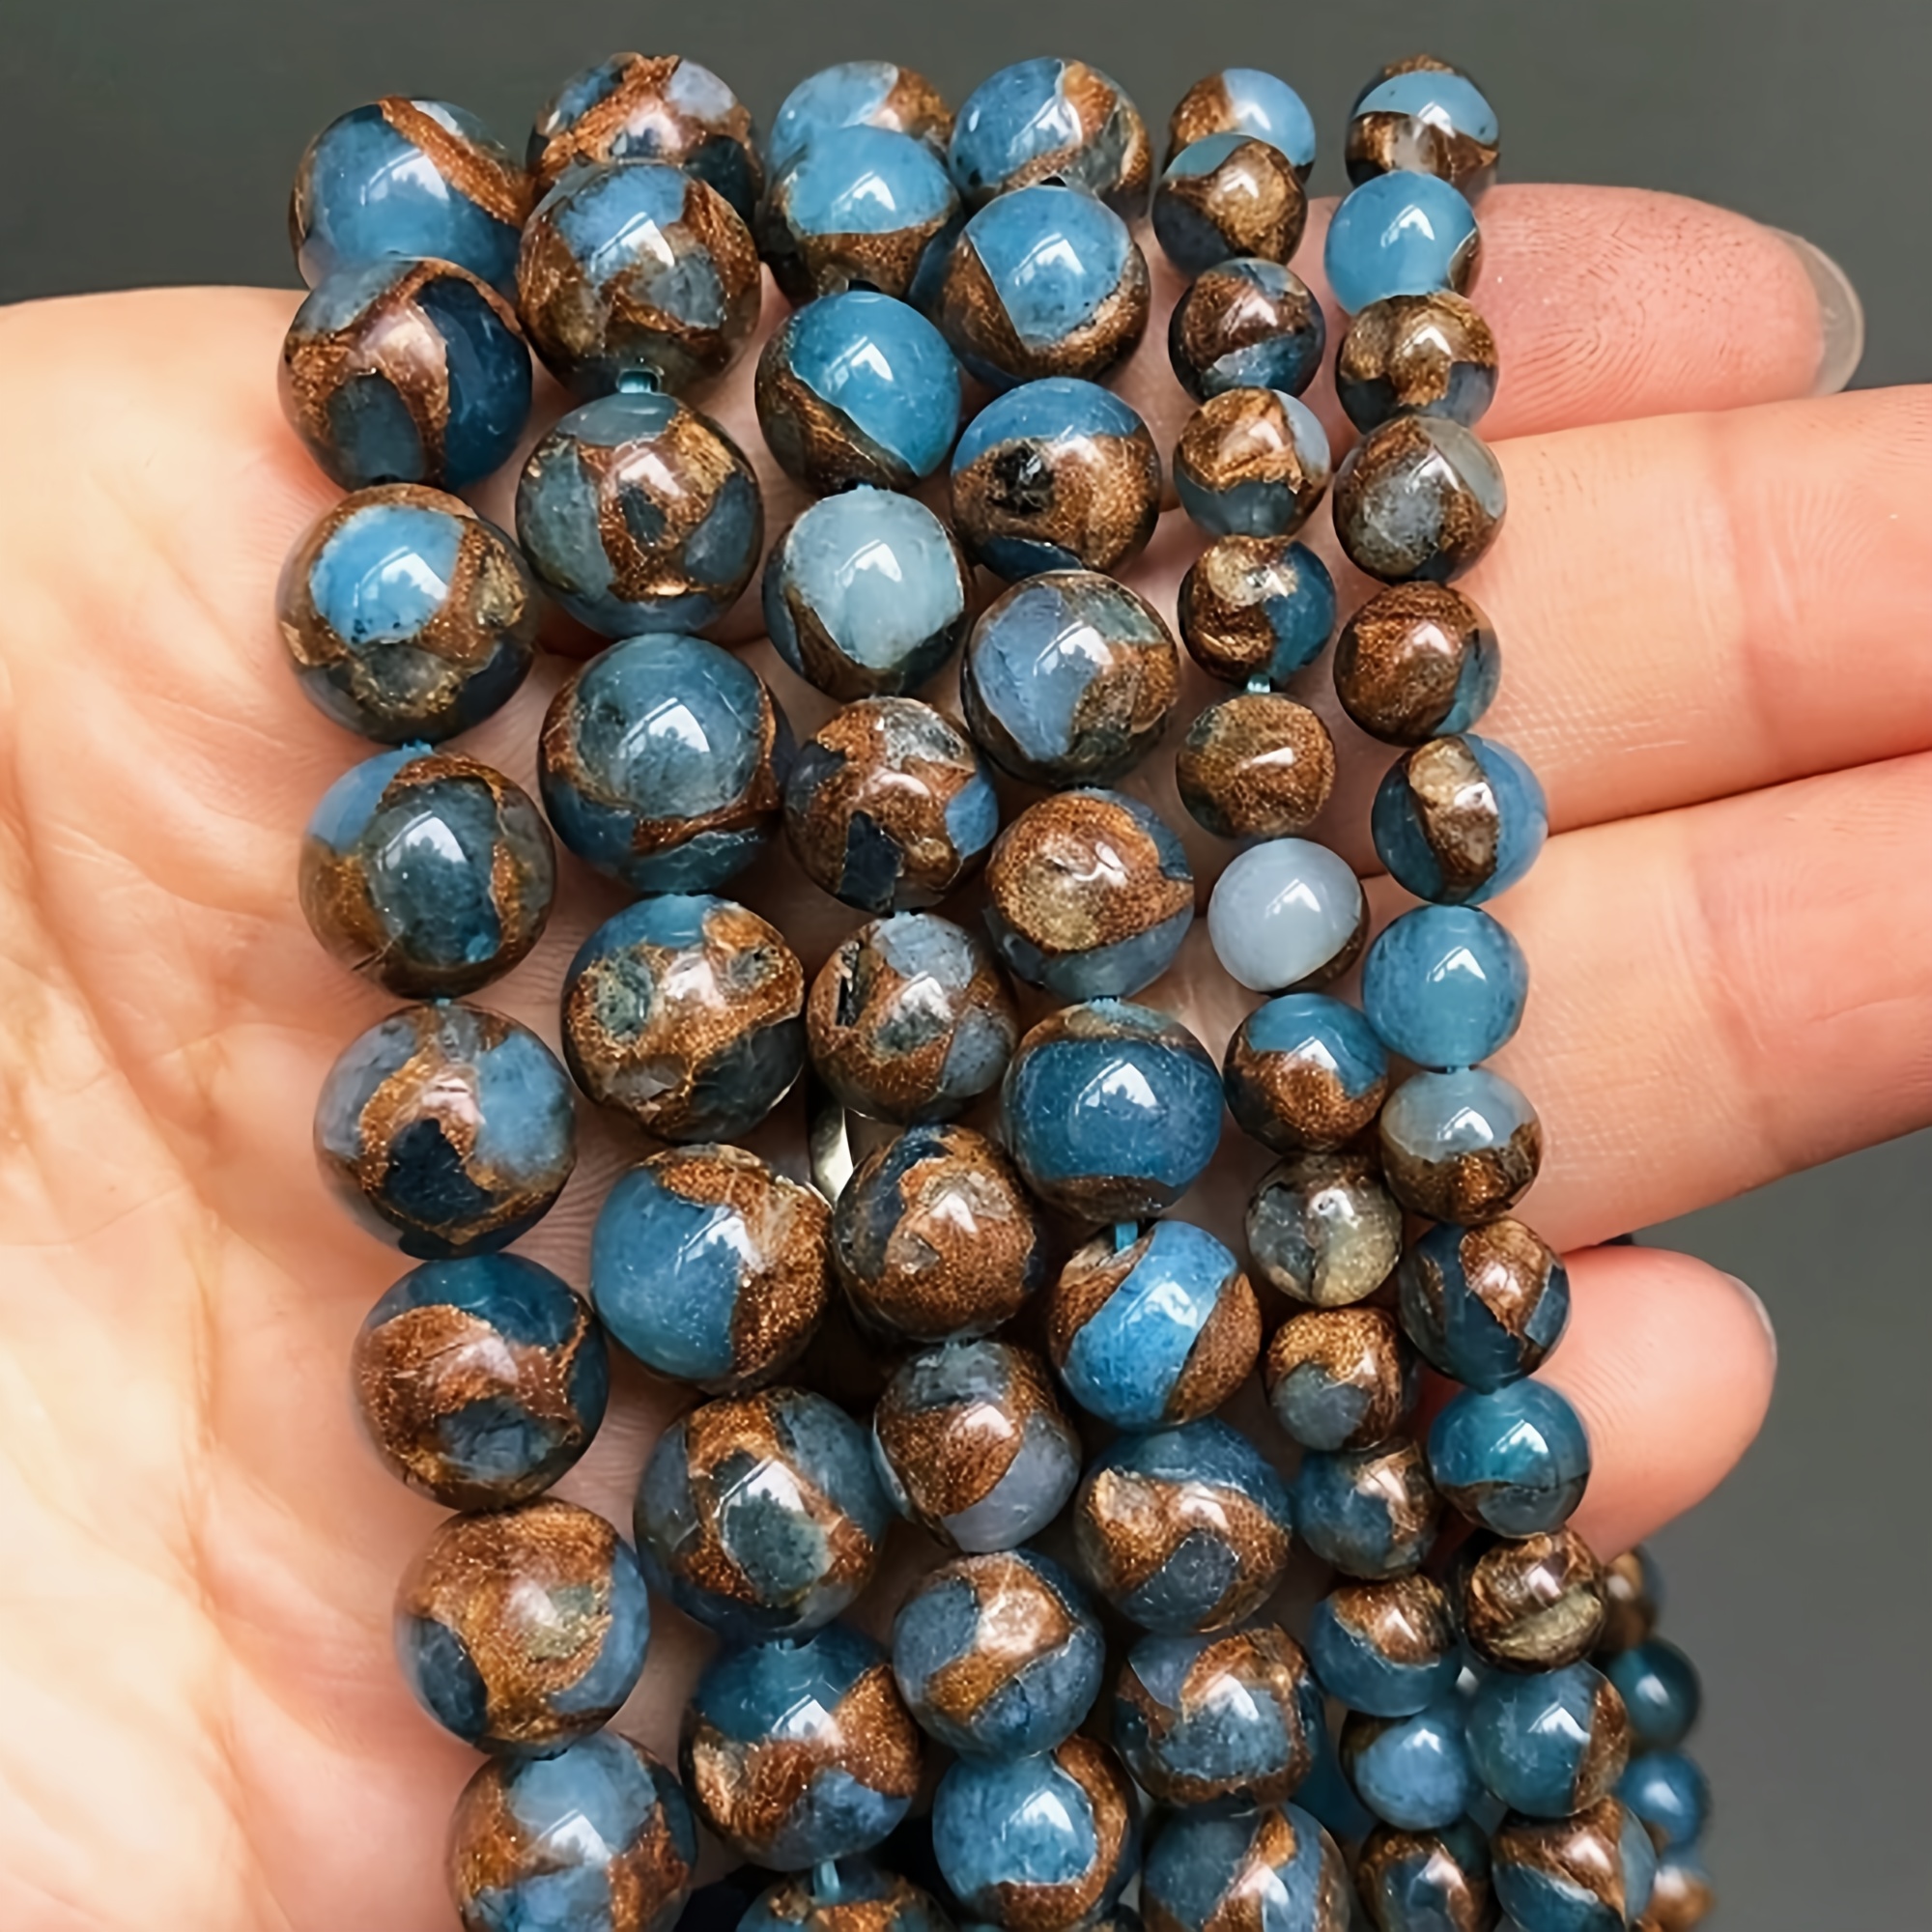 

4-12mm Natural Stone Lake Bule Cloisonne Gorgeous Loose Spacer Beads For Jewelry Making Diy Unique Fashion Bracelets Necklace Men Women Gifts Beaded Accessories